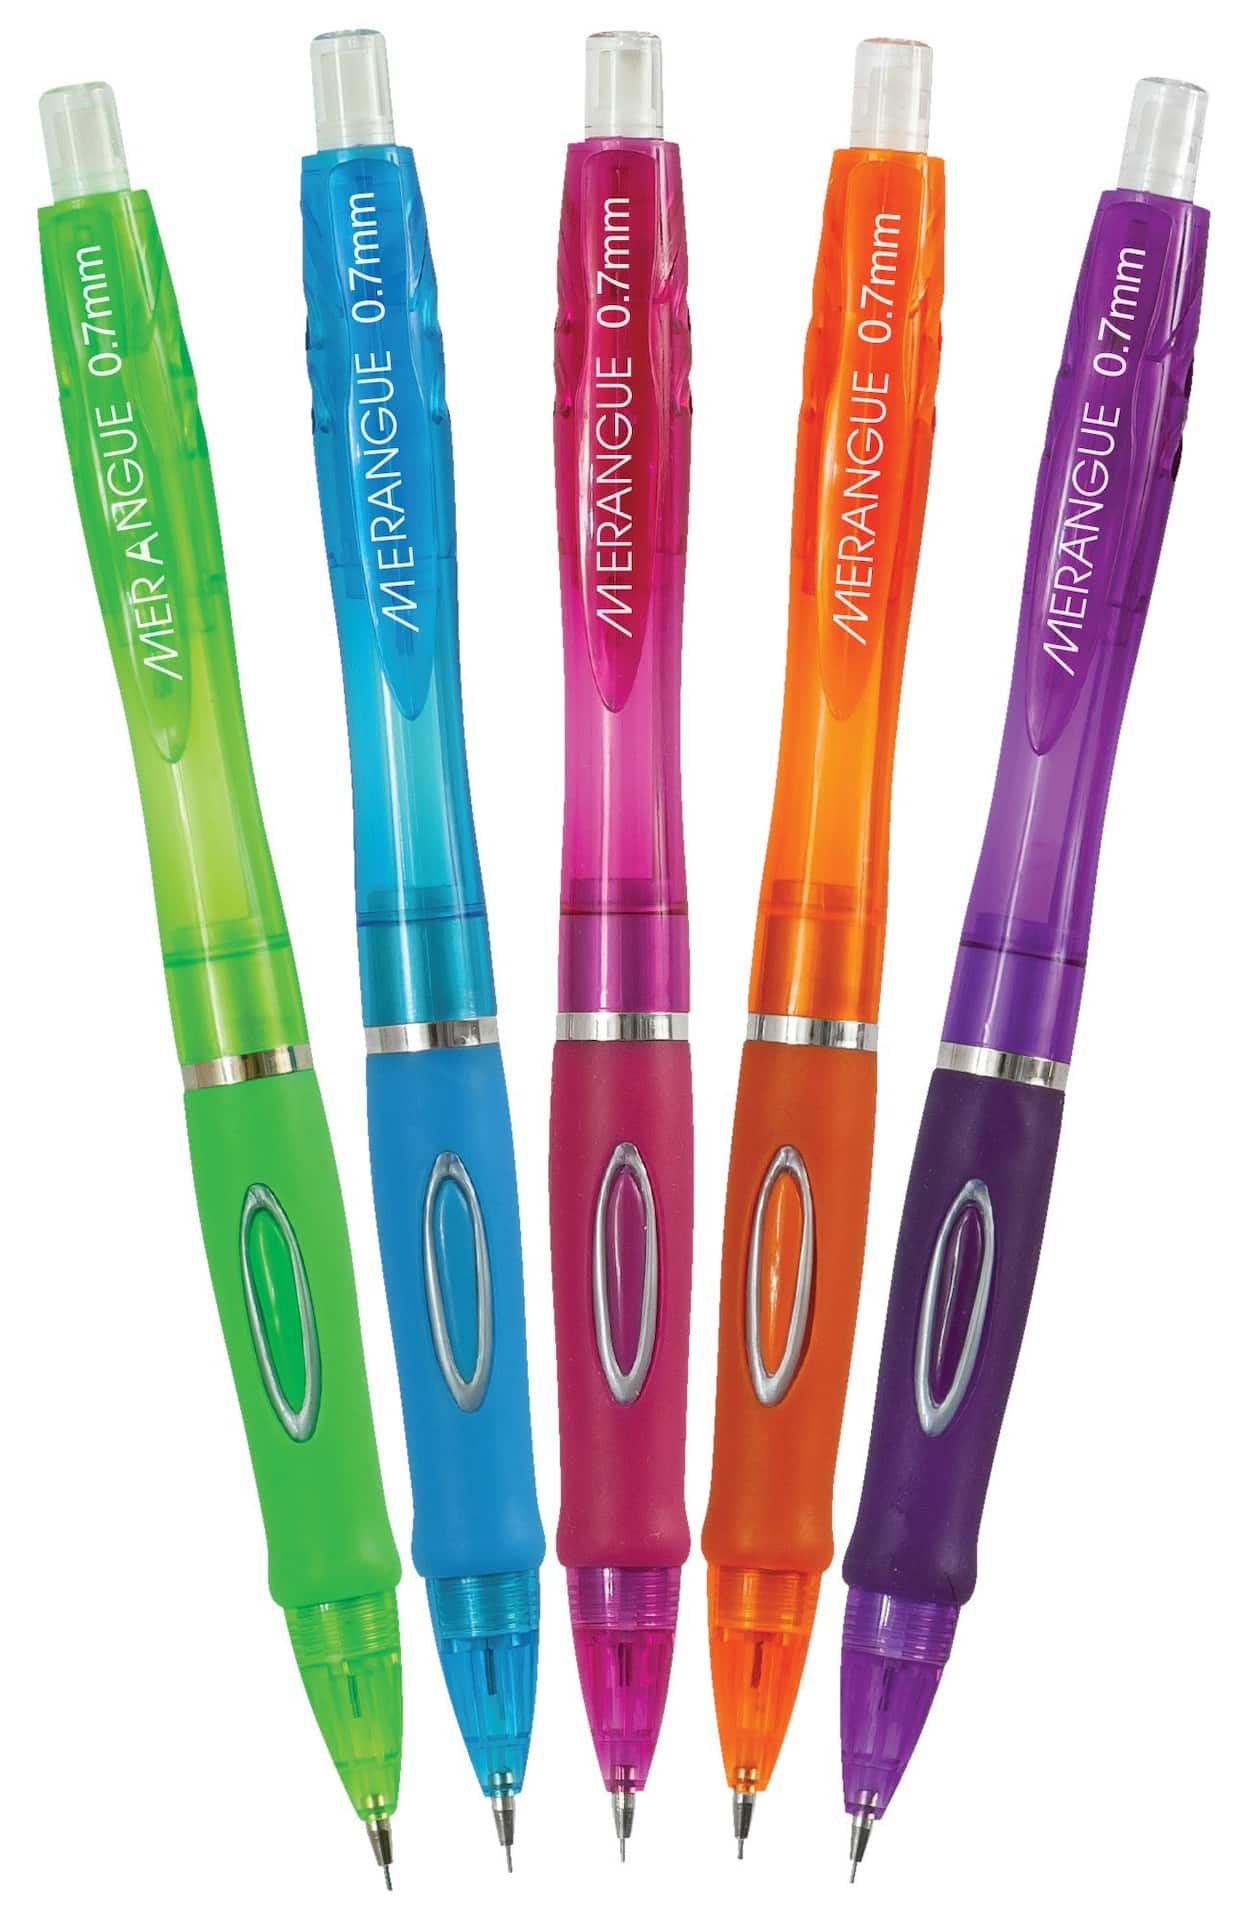 Merangue Side Click 0.7mm Mechanical Pencils, with Eraser and Lead Refills,  5 Pack